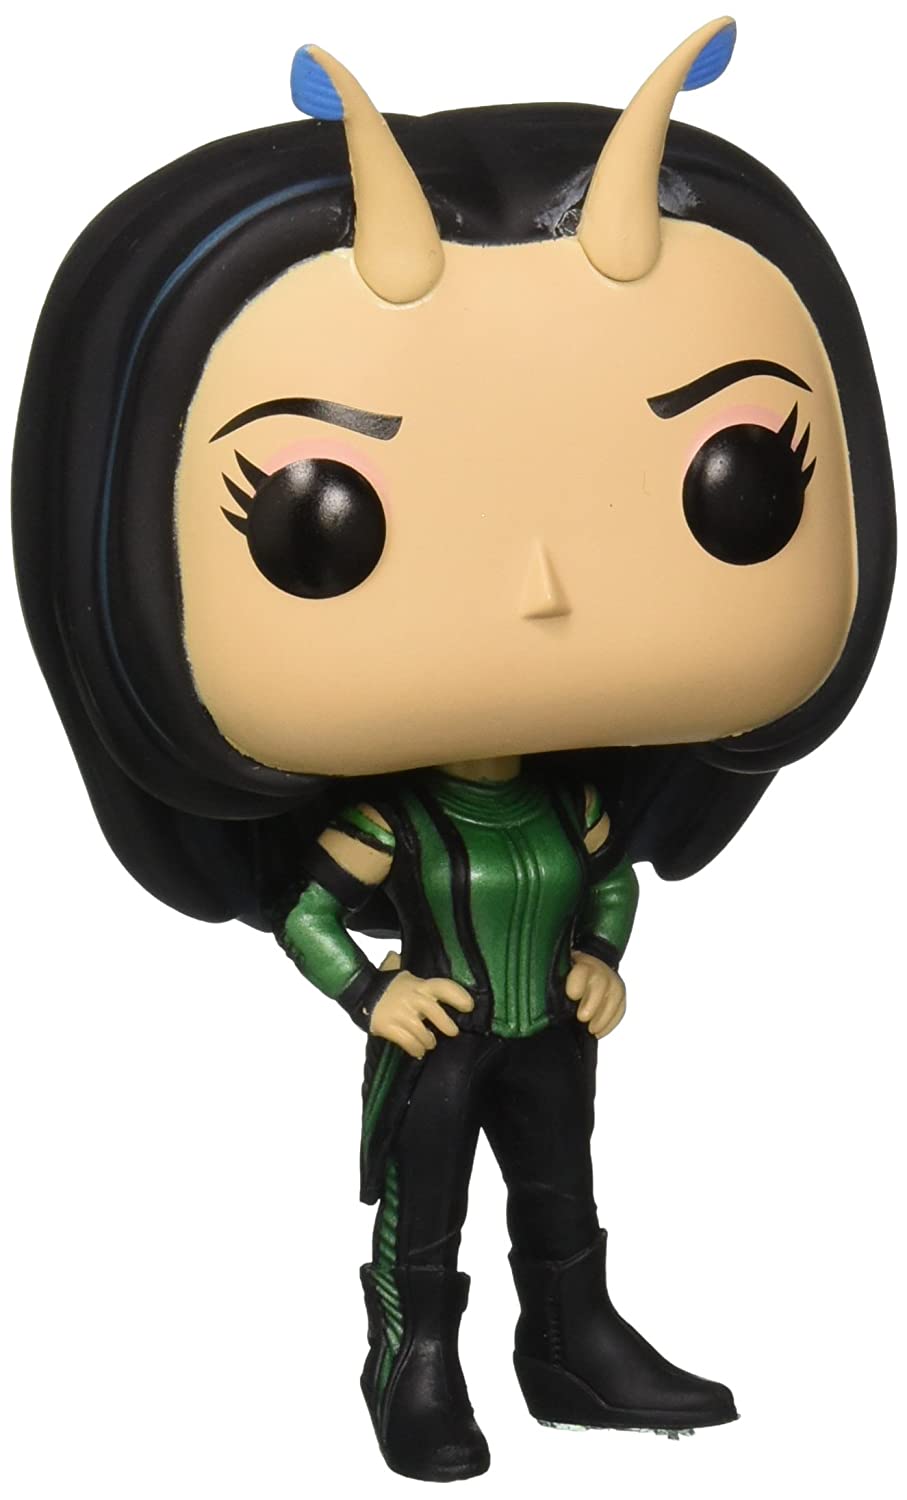 Funko POP Vinyl Figures - Movie Collection: Guardians of the Galaxy 2 - Adorable Mantis Toy Figurine Detailing